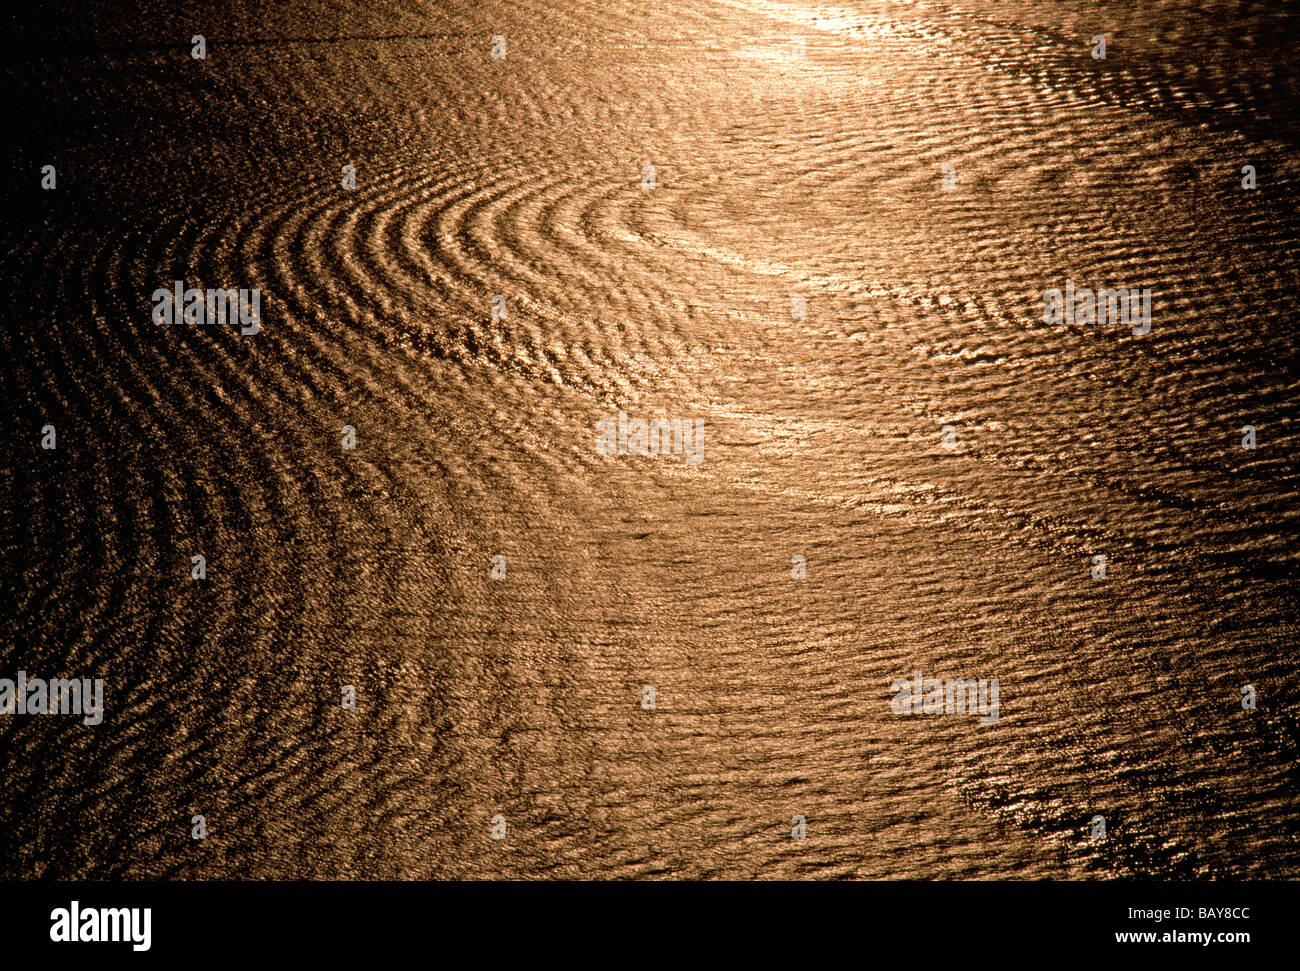 Golden sunset reflects in the ripples and waves in New York Harbor New York USA Stock Photo